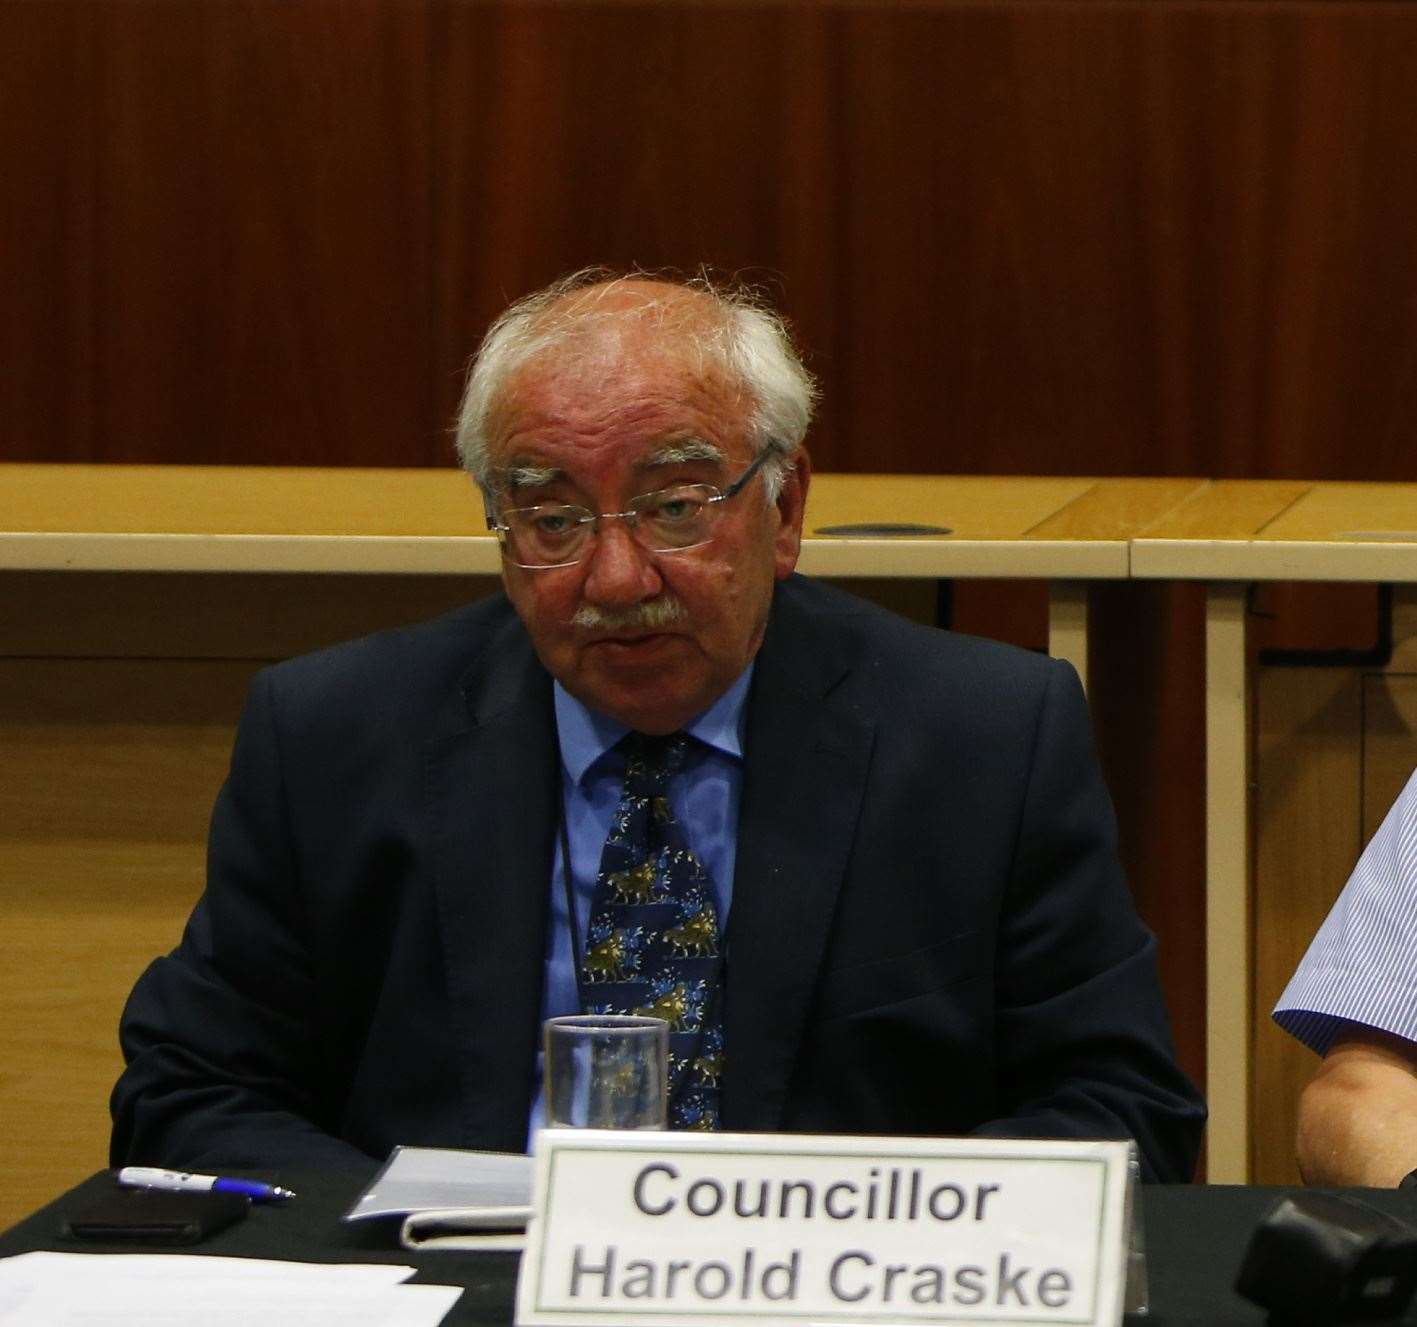 Cllr Harold Craske voted to approve the development. Picture: Andy Jones.